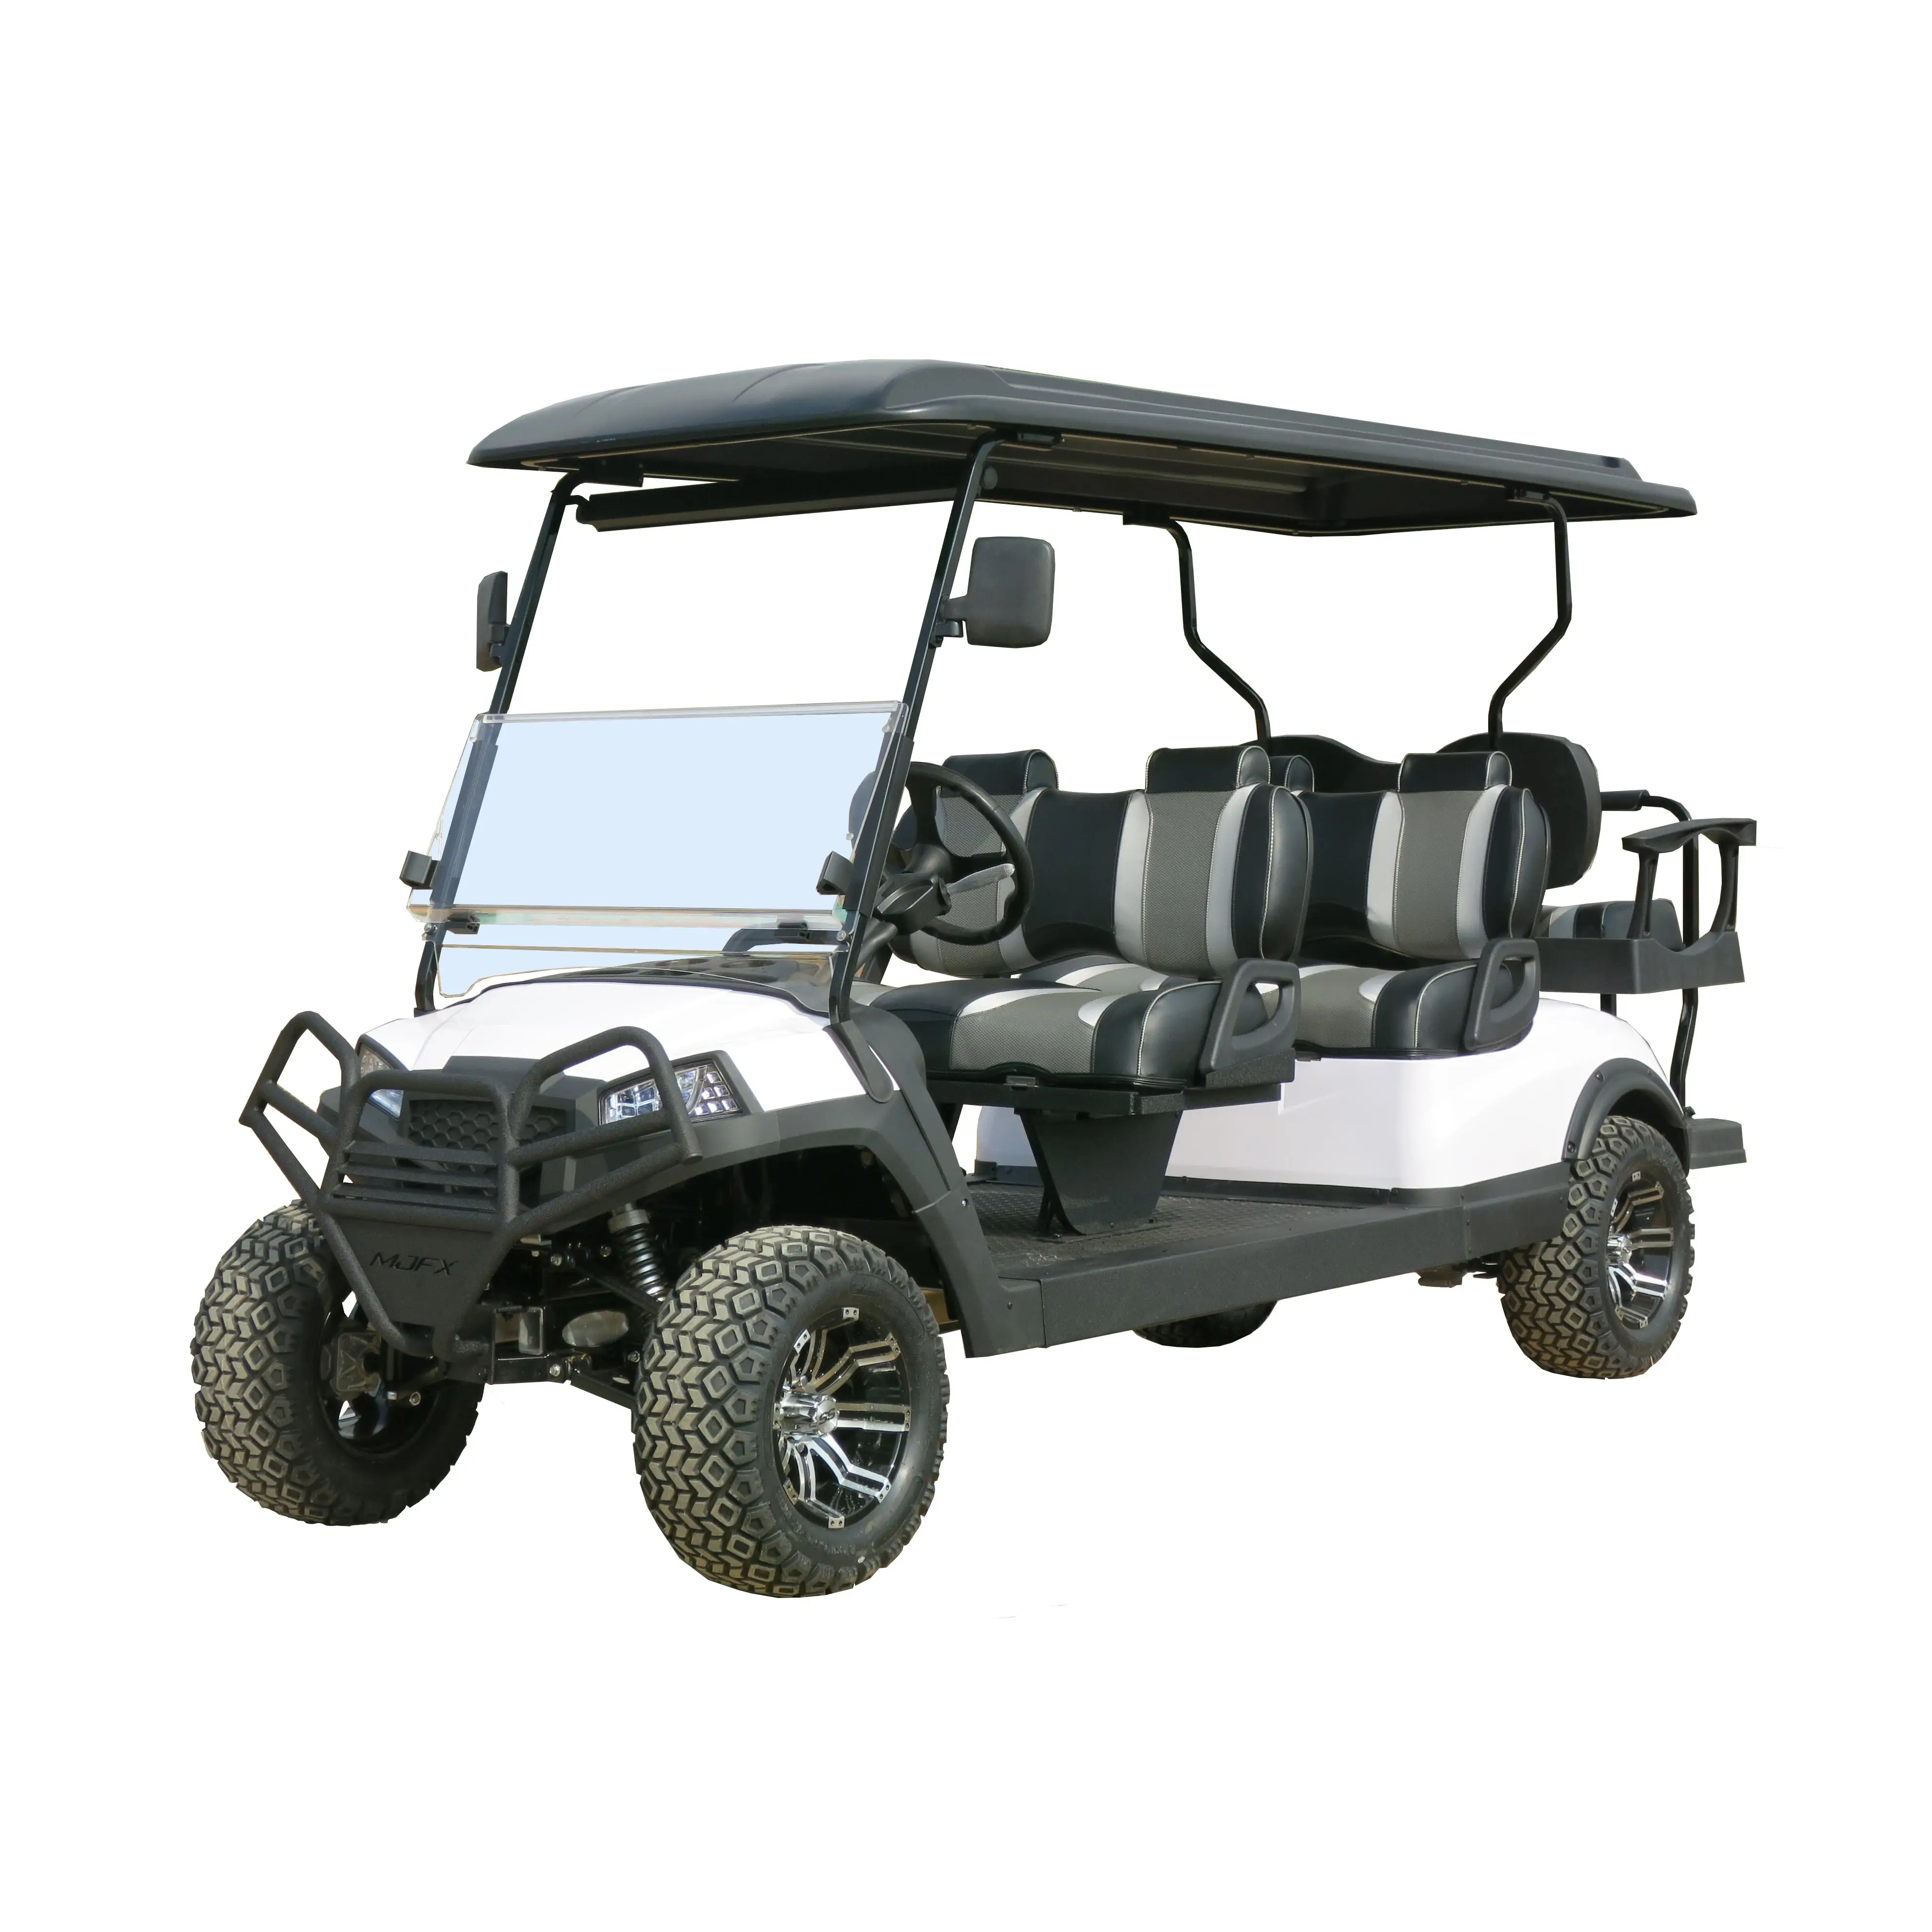 Off Road 6 Seater Good Quality Electric Golf Cart For Adults Sightseeing Tour Resort School Factory Airport Campus